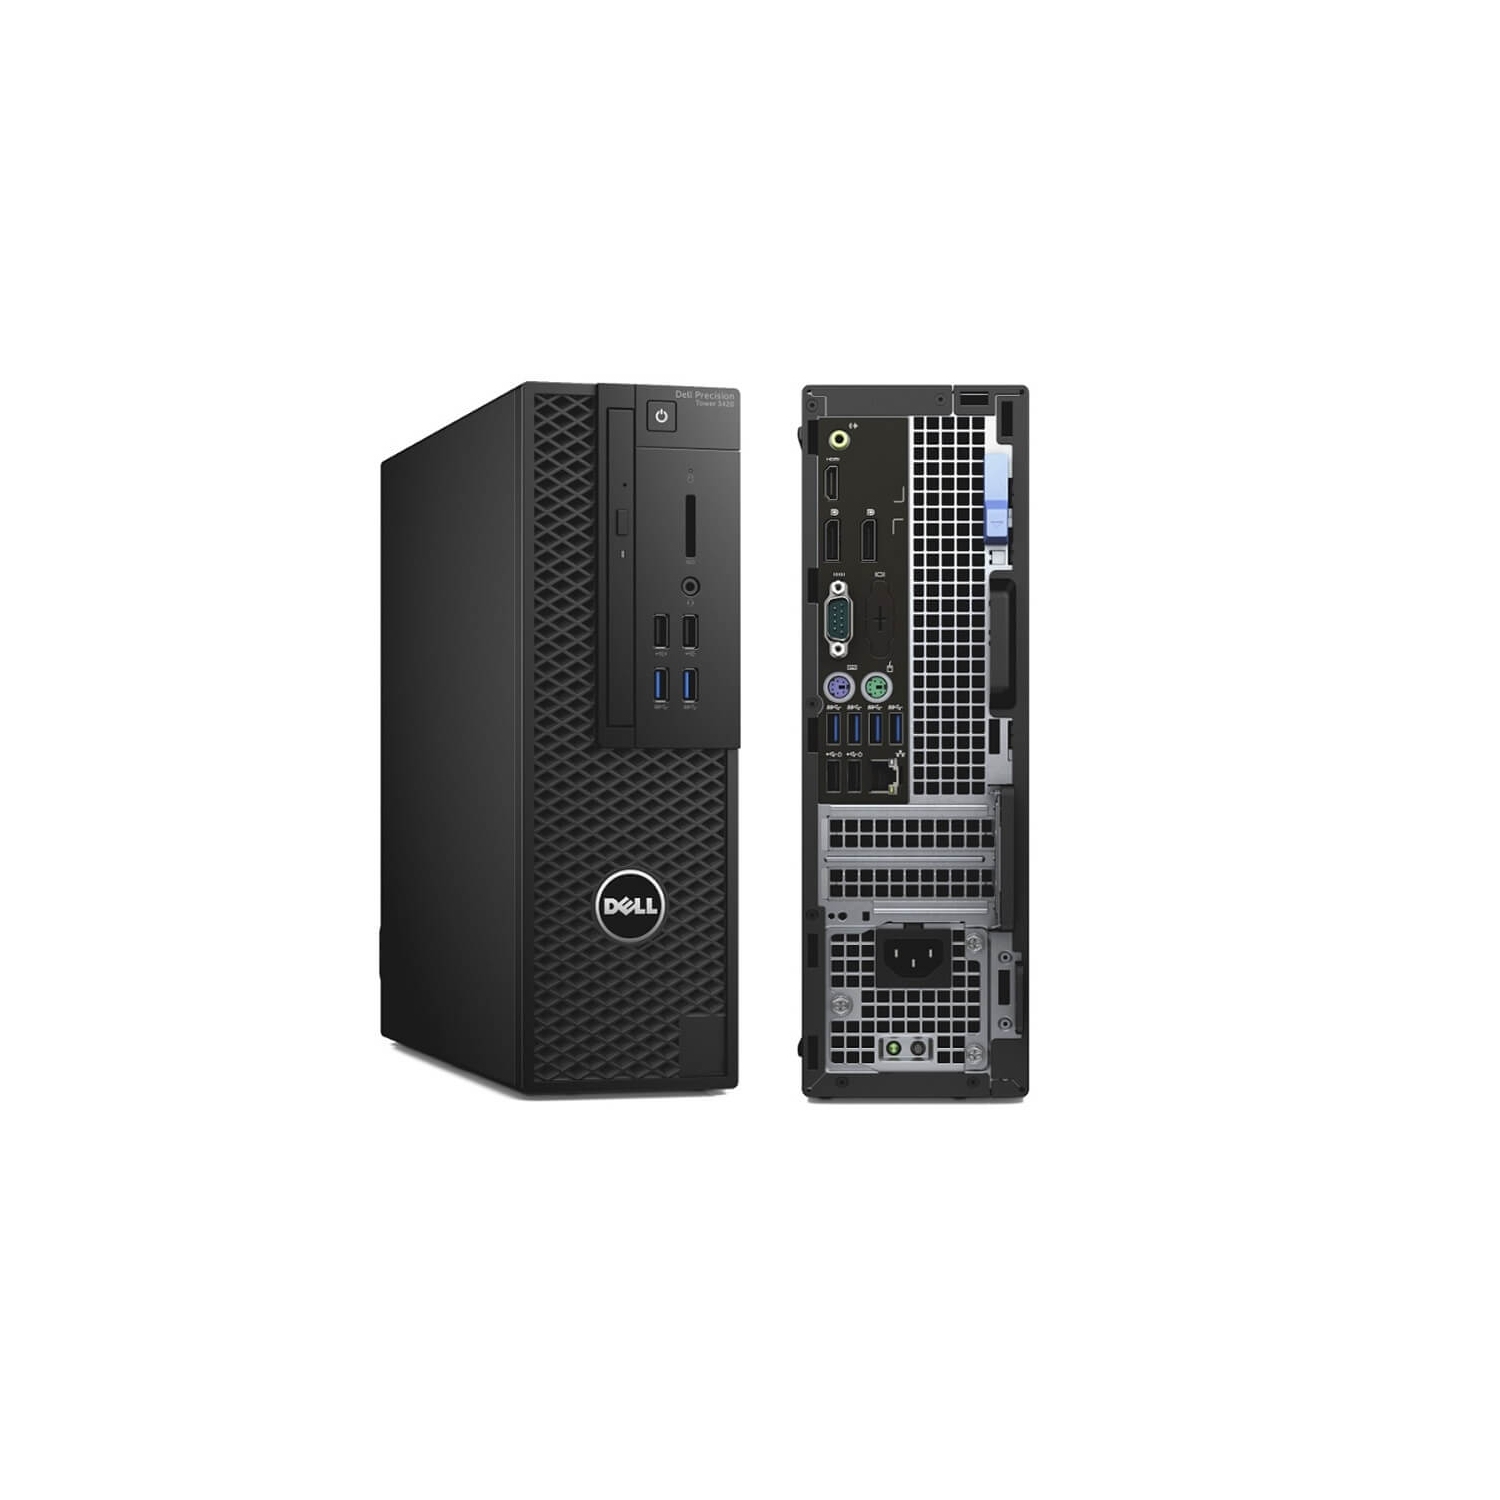 Refurbished (Good) - Dell Precision Tower 3420 Workstation i5-6500 4C  3.2Ghz 16GB 500GB NVMe 2TB Win 10